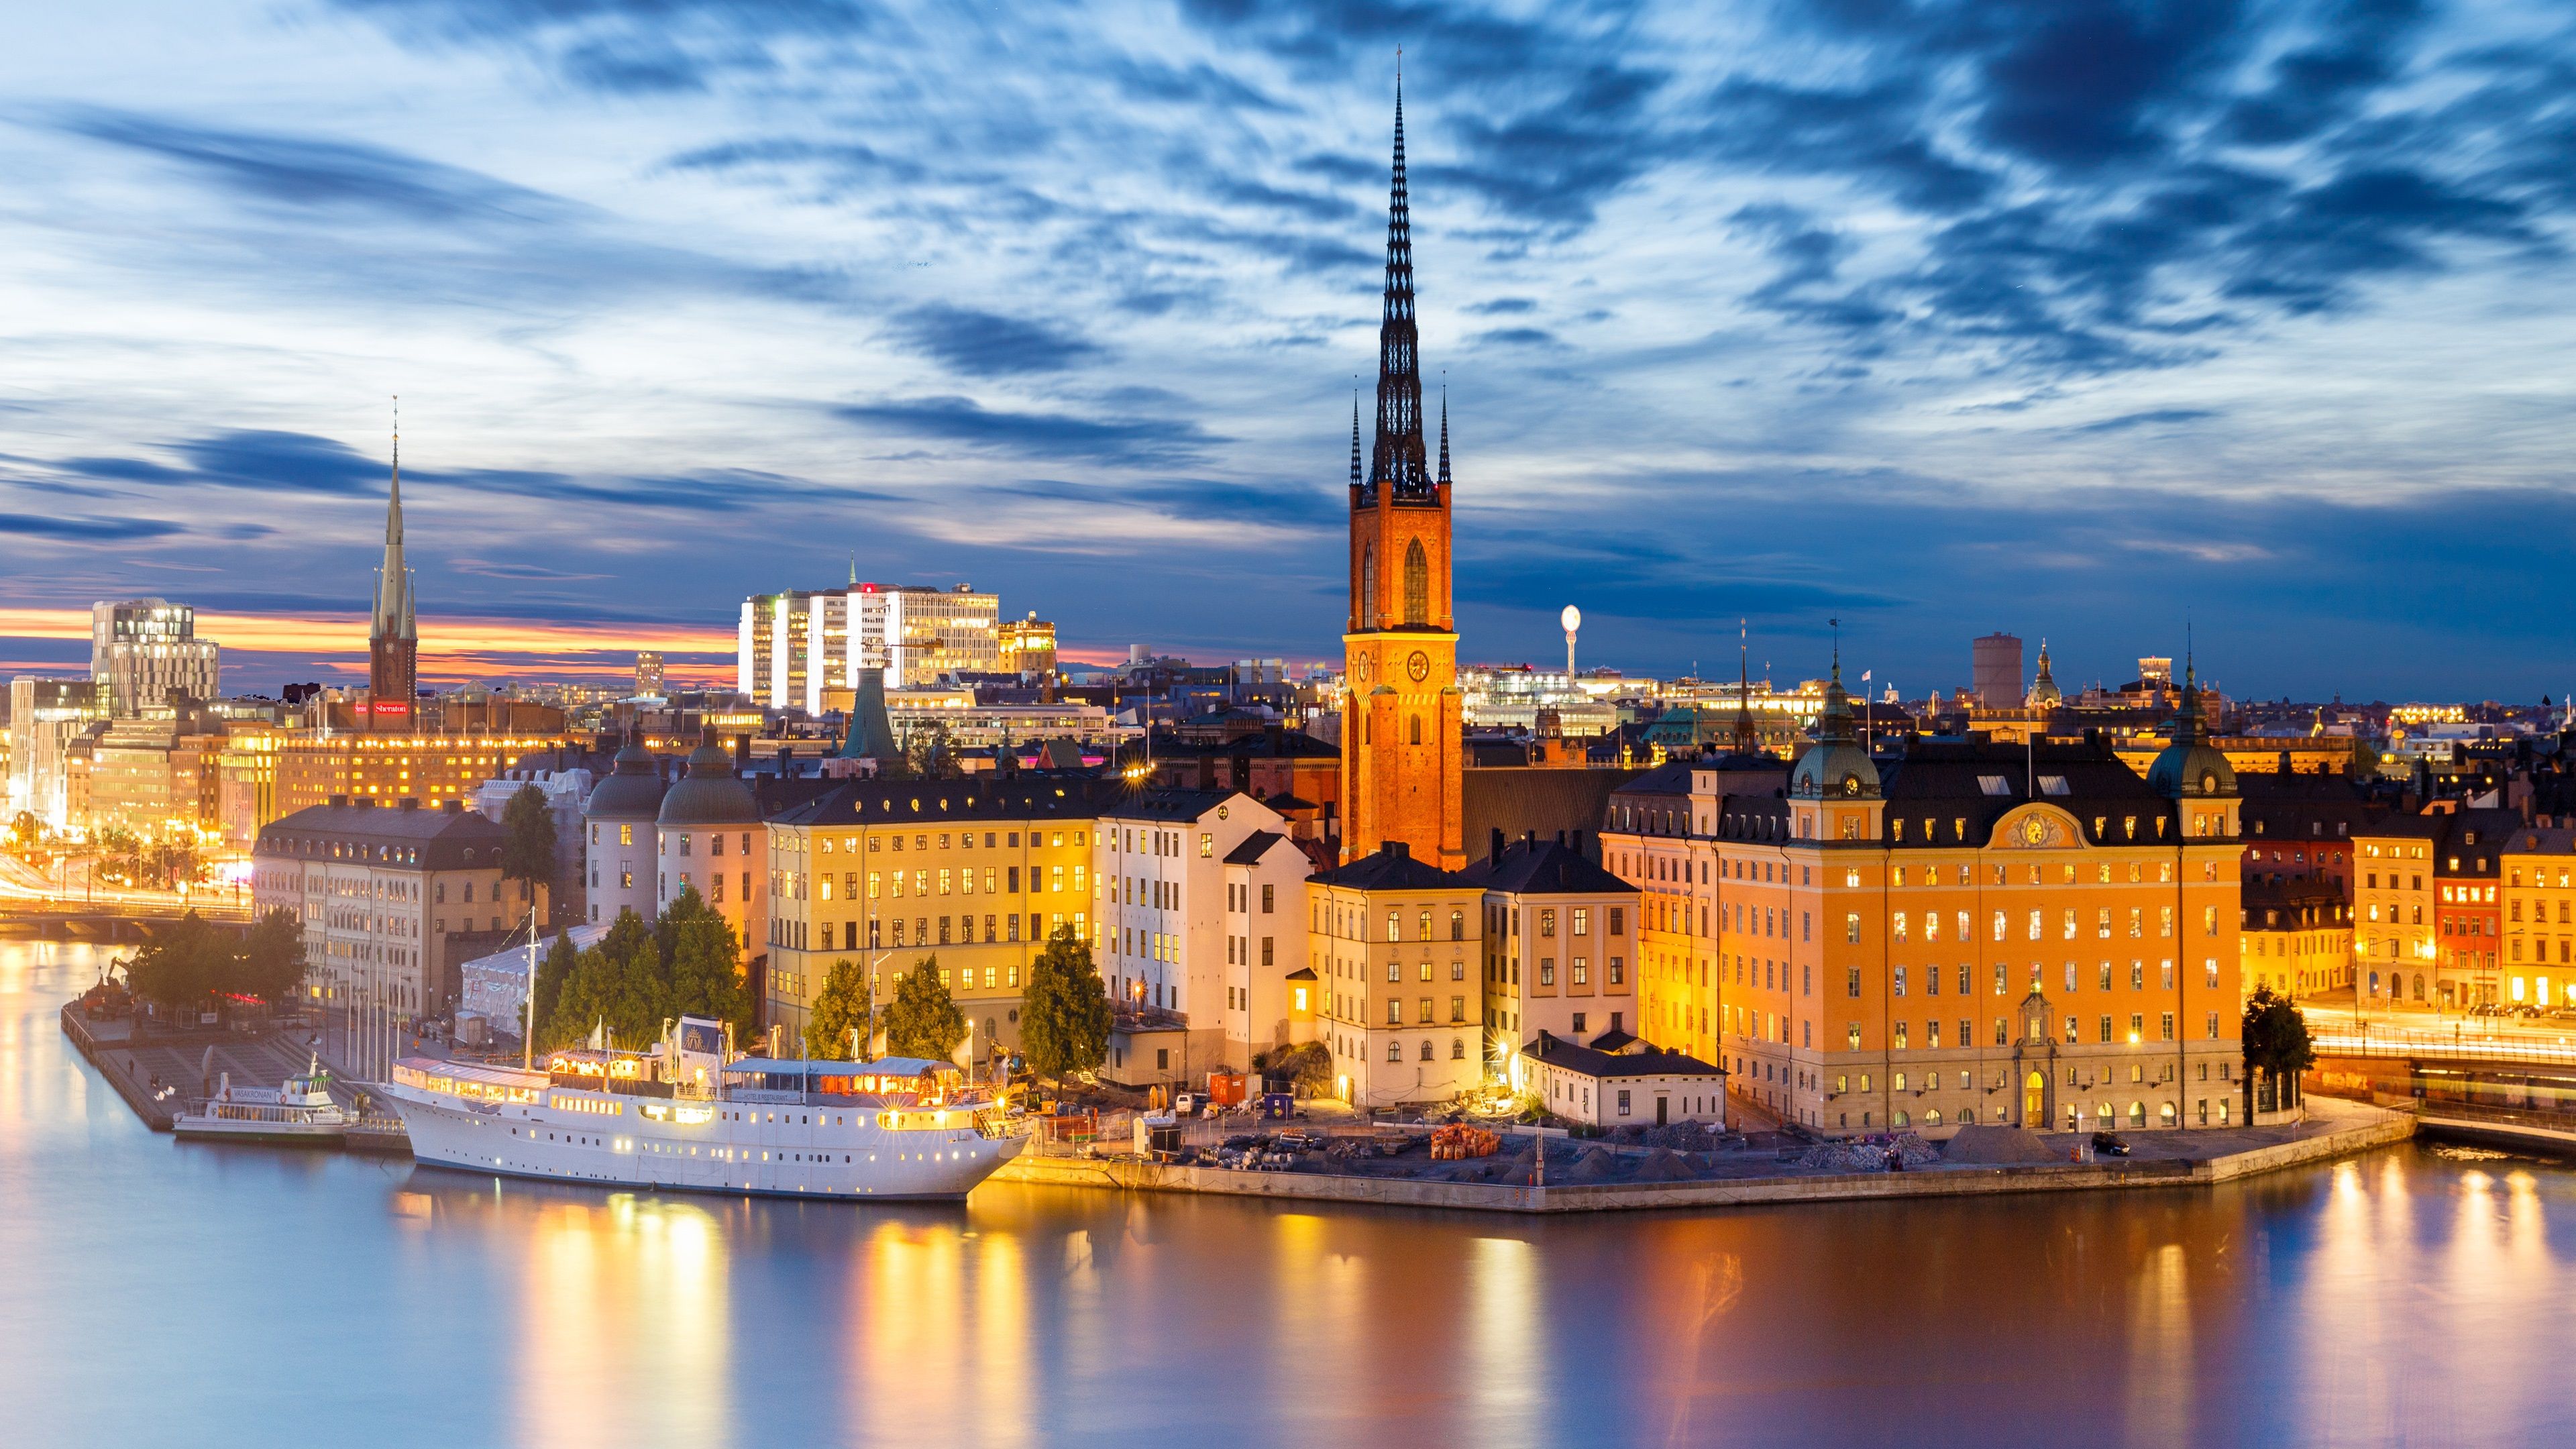 Wallpaper Stockholm at night, houses, buildings, lights, river, city, Sweden 3840x2160 UHD 4K Picture, Image